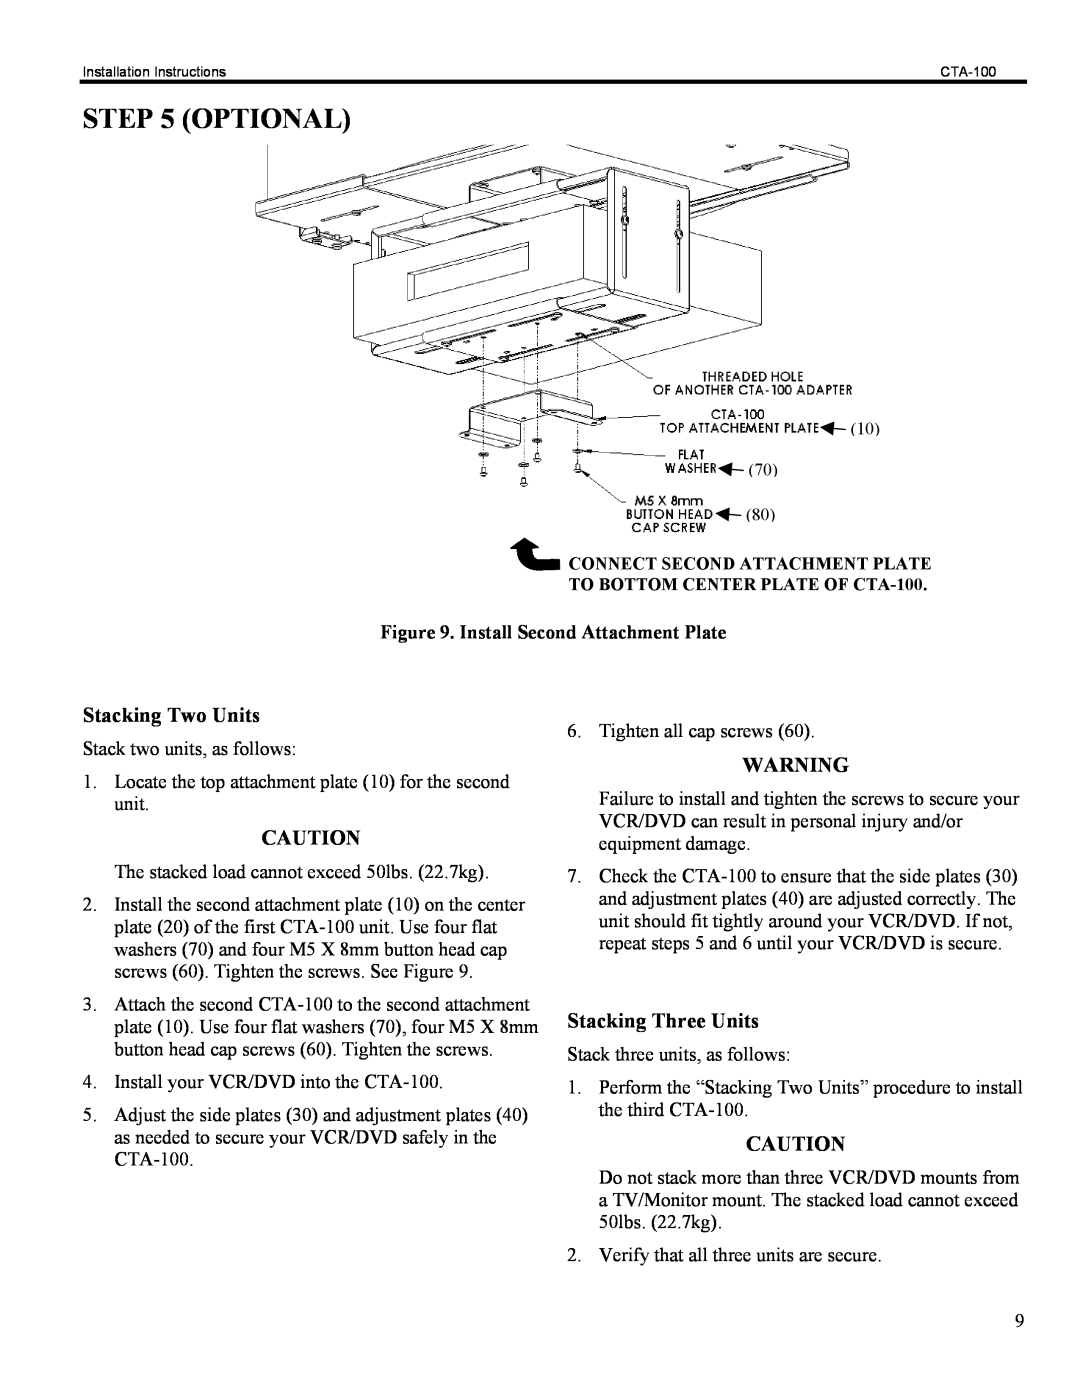 Chief Manufacturing CTA-100 installation instructions Optional, Stacking Two Units, Stacking Three Units 